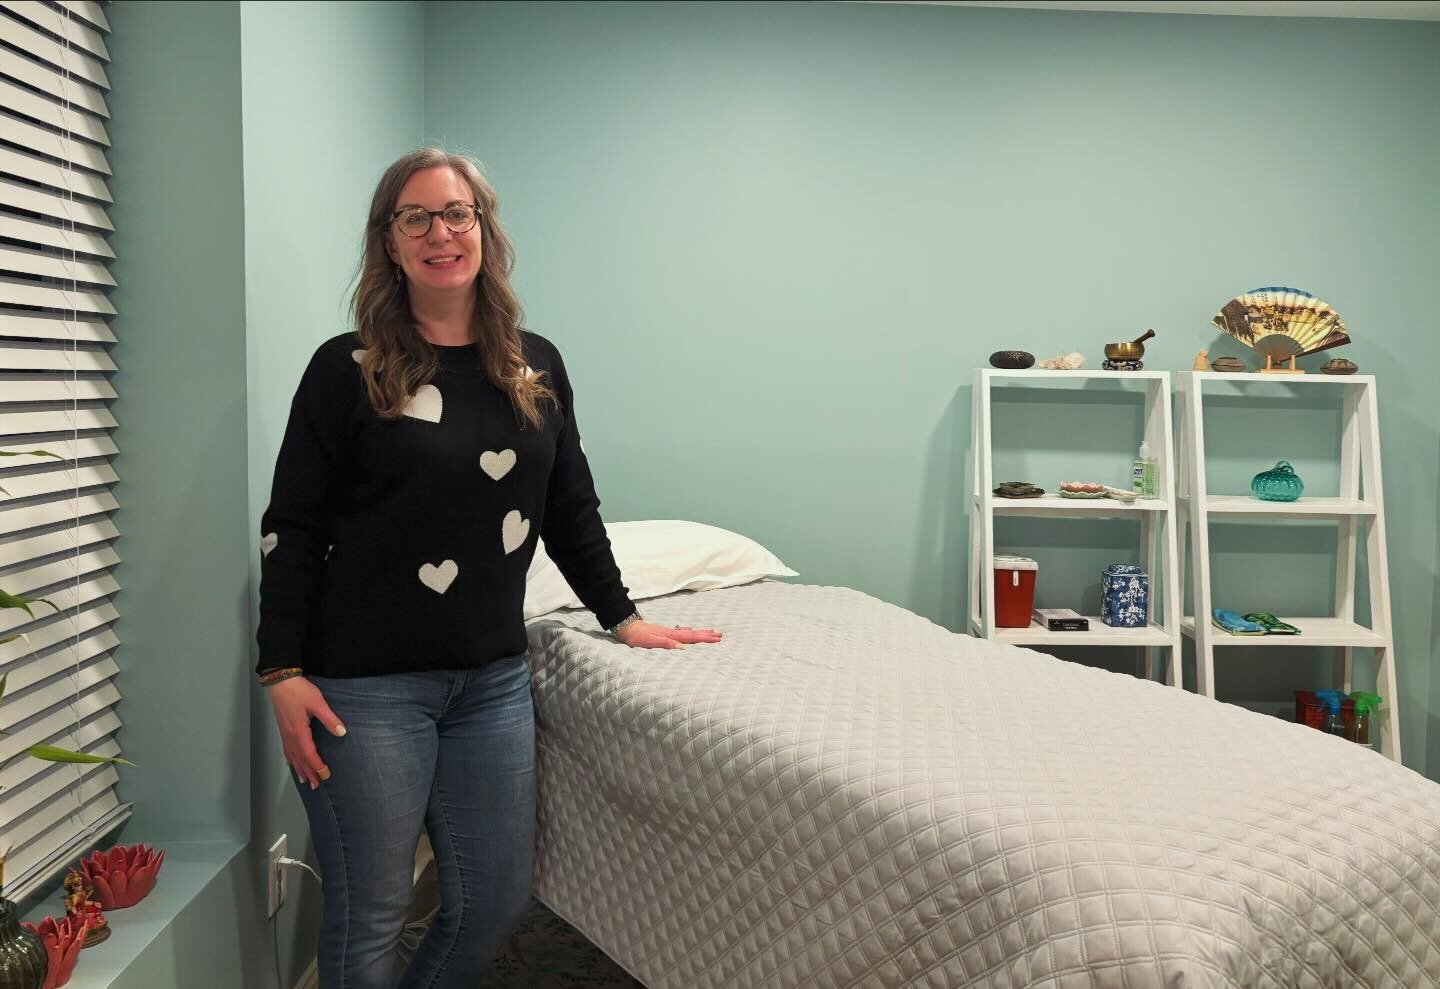 🎉It&rsquo;s my big announcement!

🎊My woodbine acupuncture practice is moving to Mount Airy the week of February 12th. 

🙌 I am so excited to continue to provide you with exceptional wellness care in our wonderful Mt Airy community.

📲 DM me for 